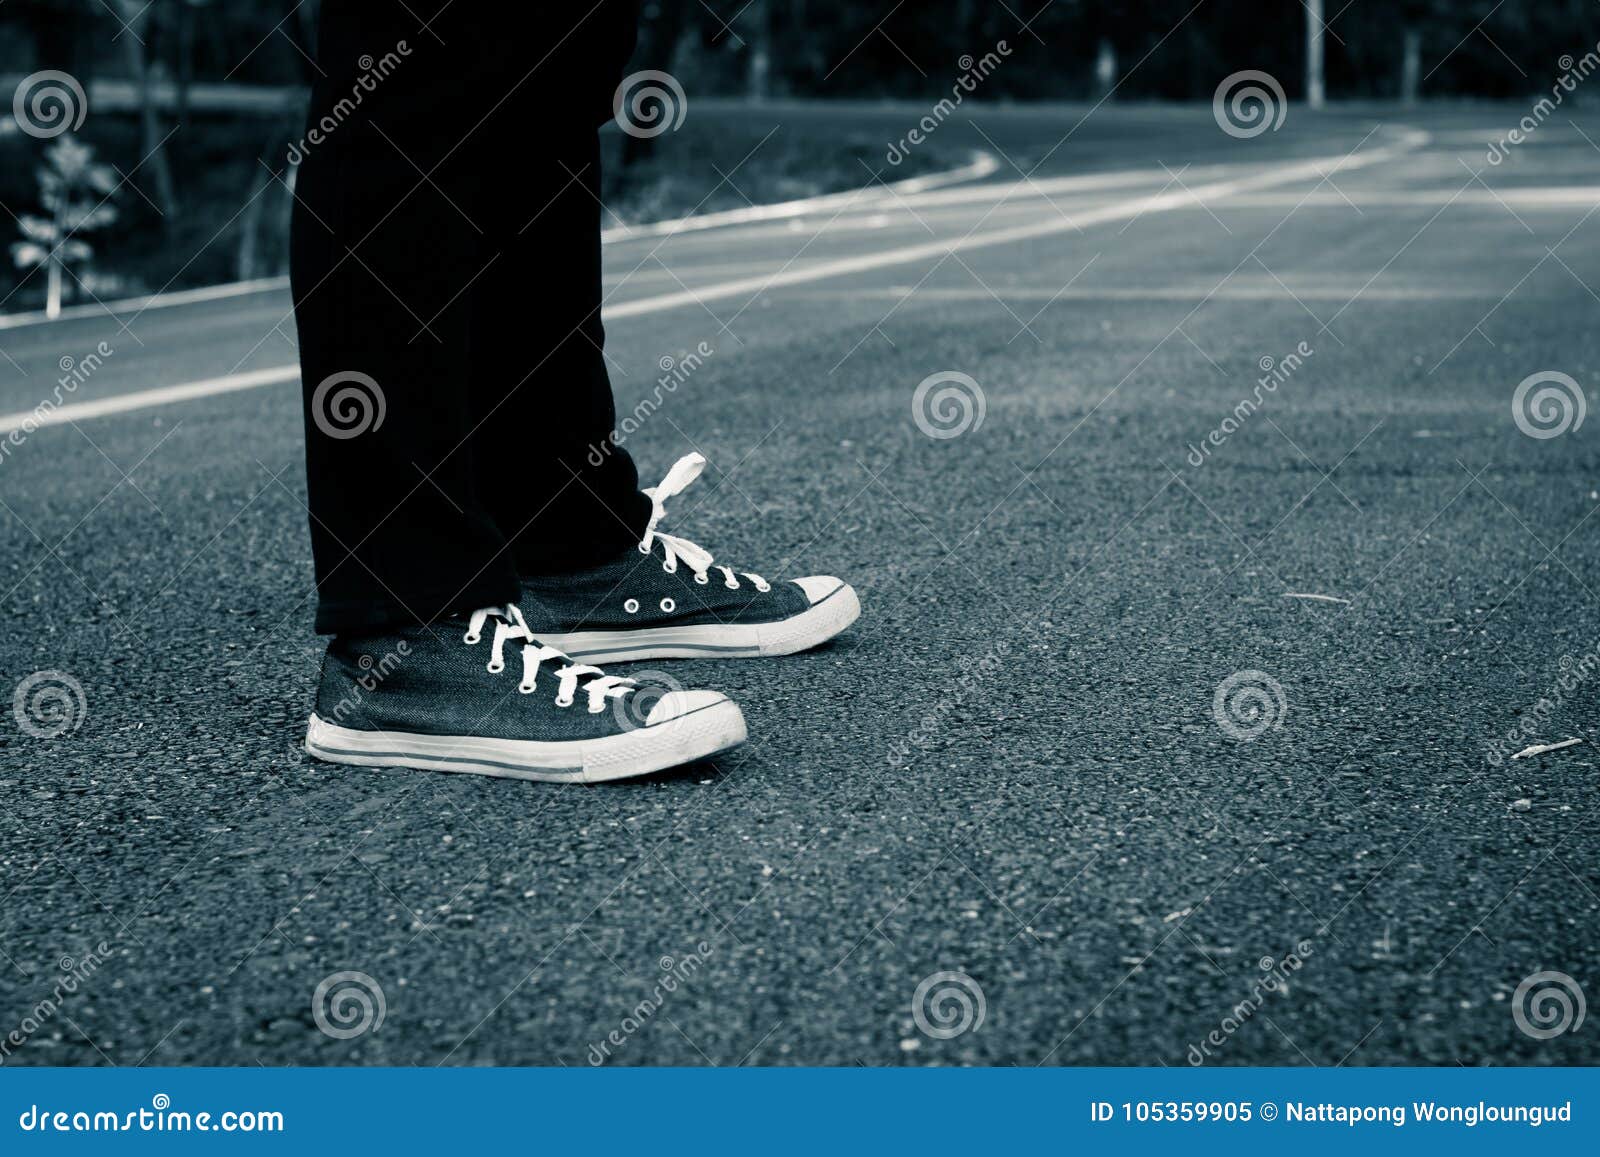 Foot on Road Backpacking Travel. Stock Image - Image of surface ...